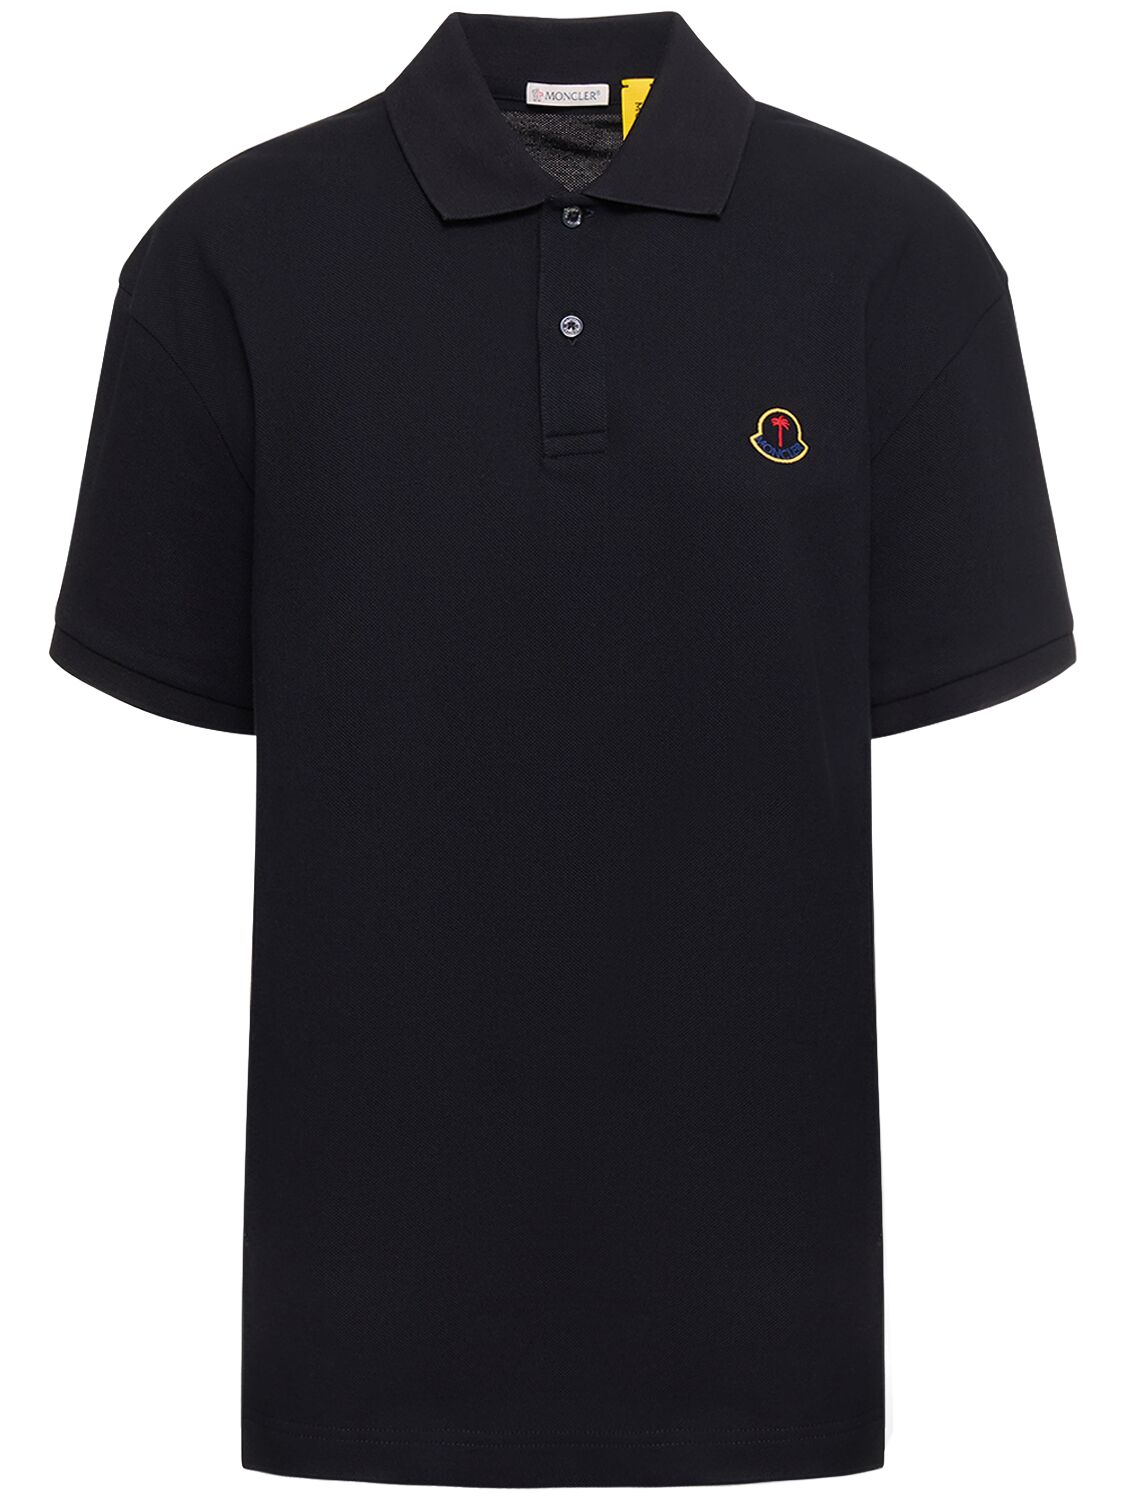 Moncler Genius Moncler X Palm Angels Piquet Polo Shirt In Navy